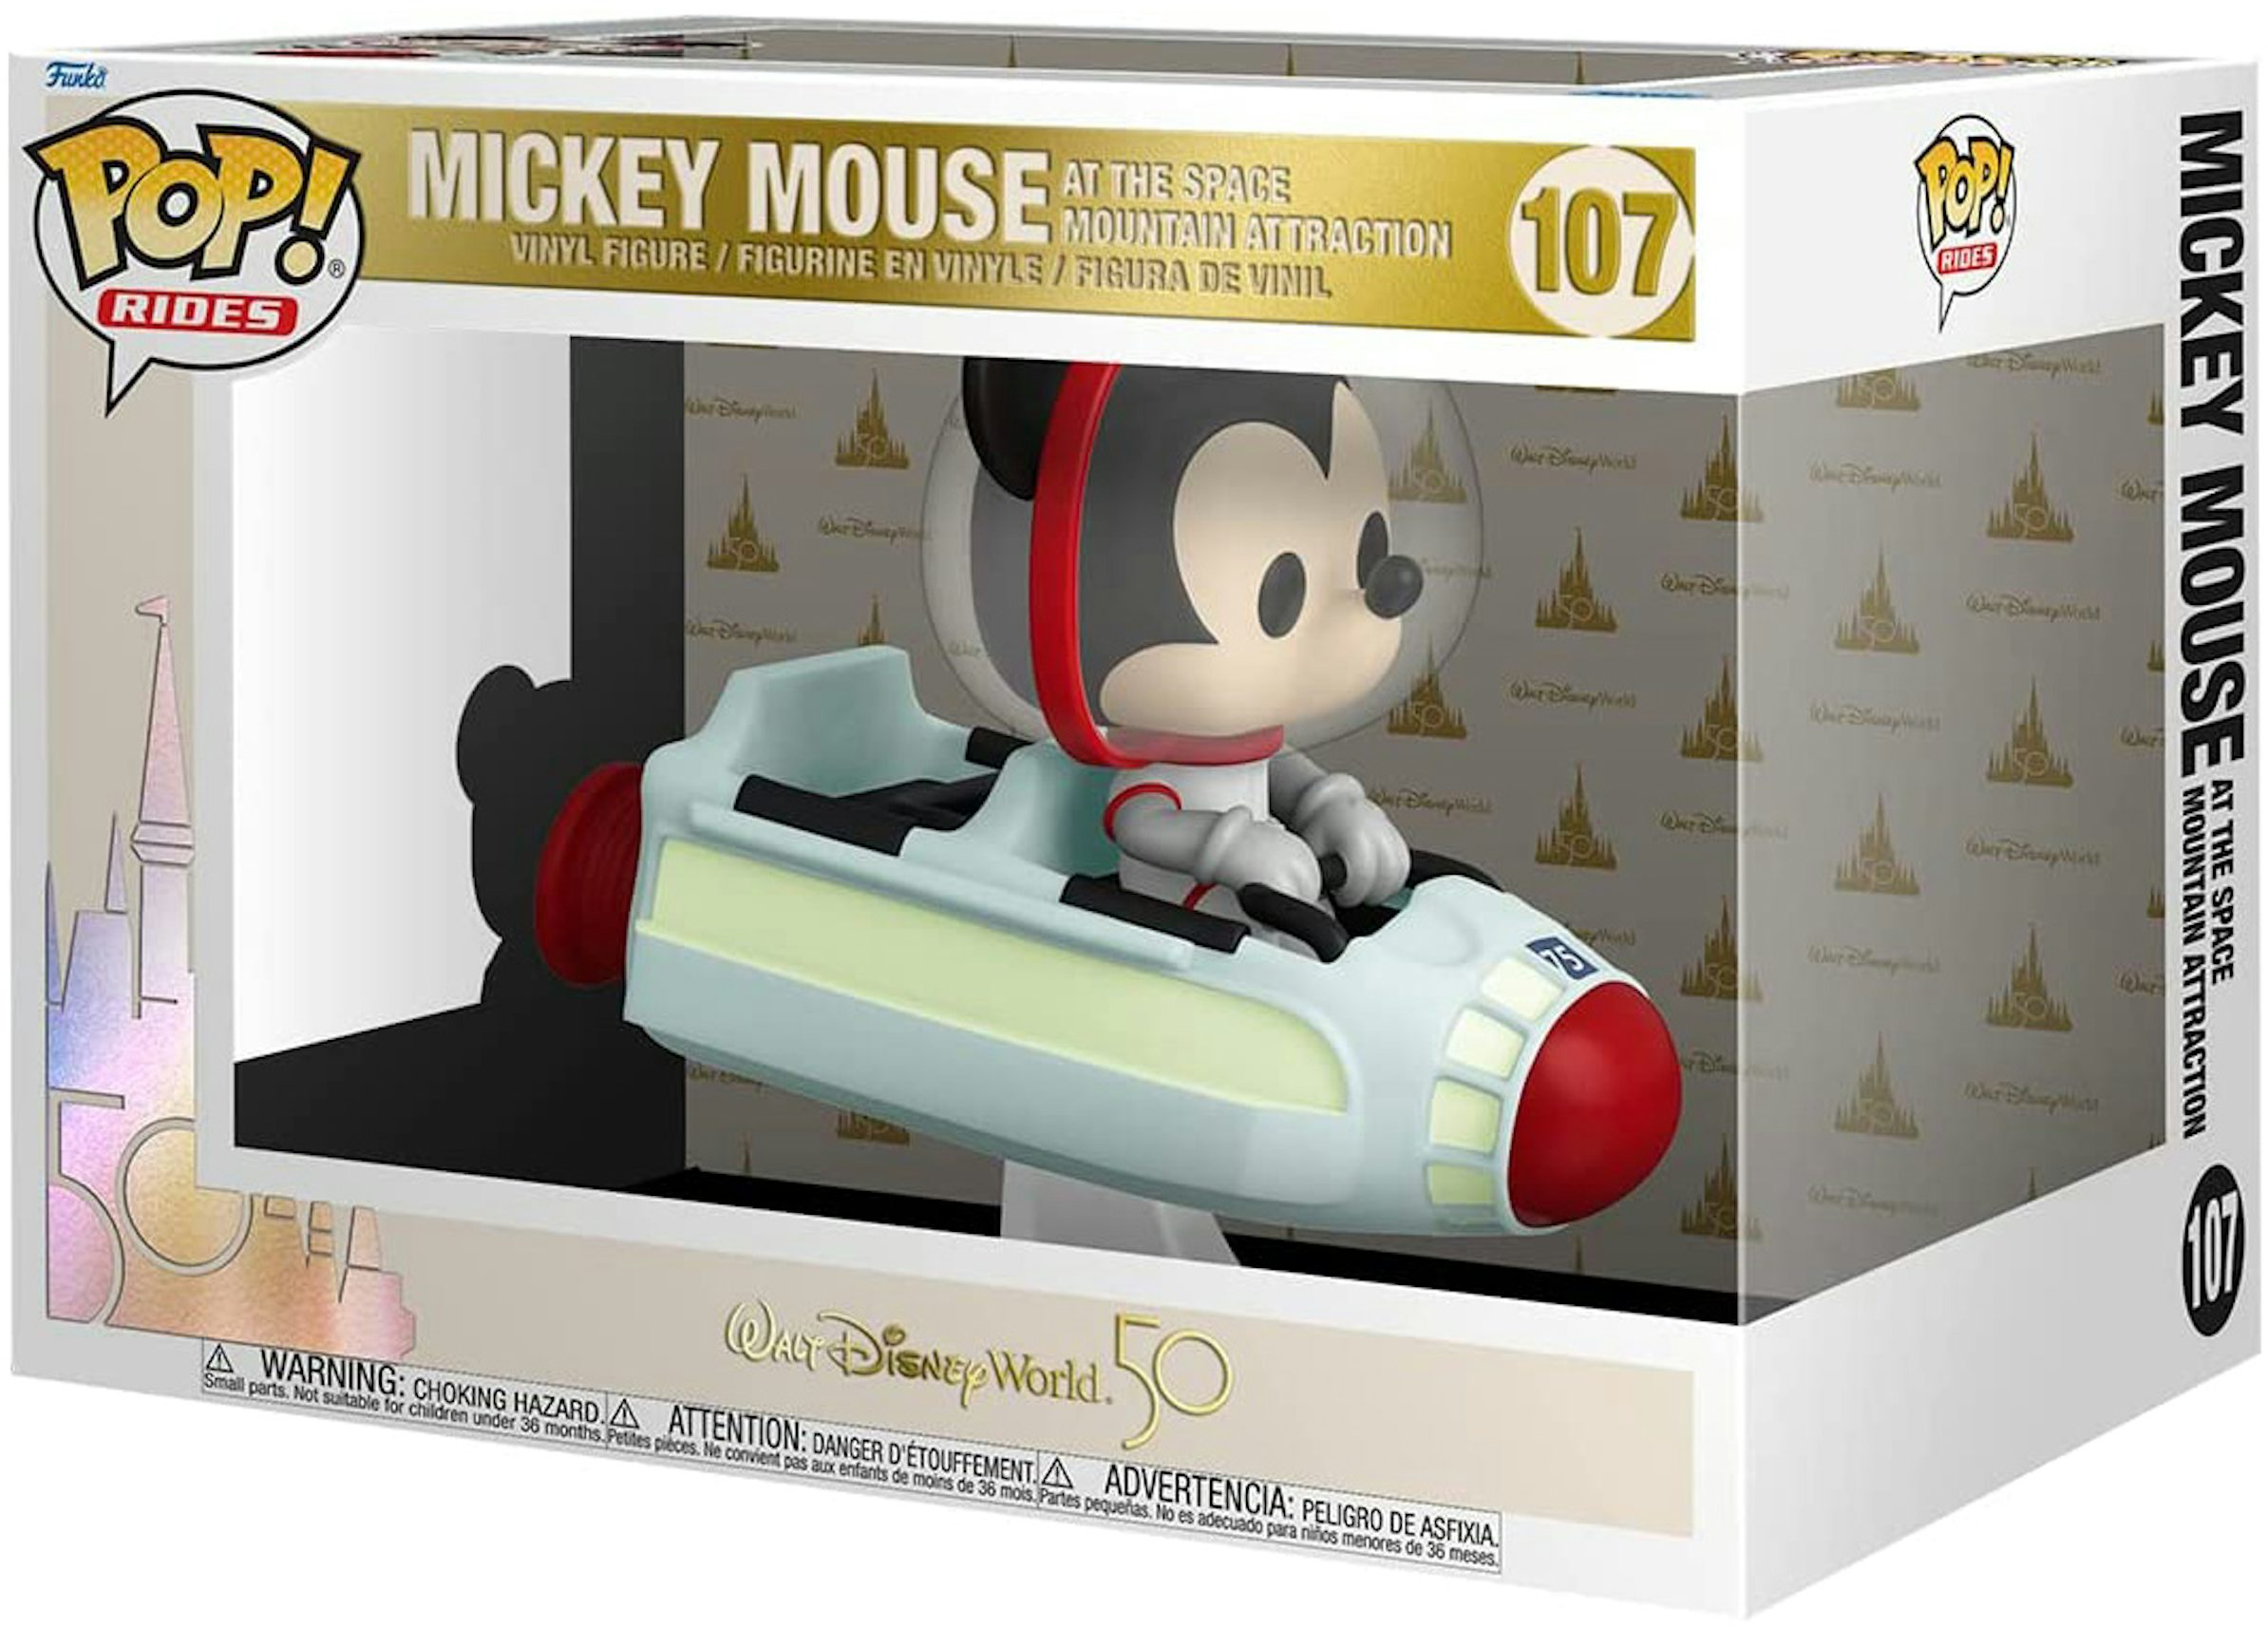 https://images.stockx.com/images/Funko-Pop-Rides-Walt-Disney-World-50th-Anniversary-Mickey-Mouse-At-The-Space-Mountain-Attraction-Figure-107.jpg?fit=fill&bg=FFFFFF&w=1200&h=857&fm=jpg&auto=compress&dpr=2&trim=color&updated_at=1636058901&q=60